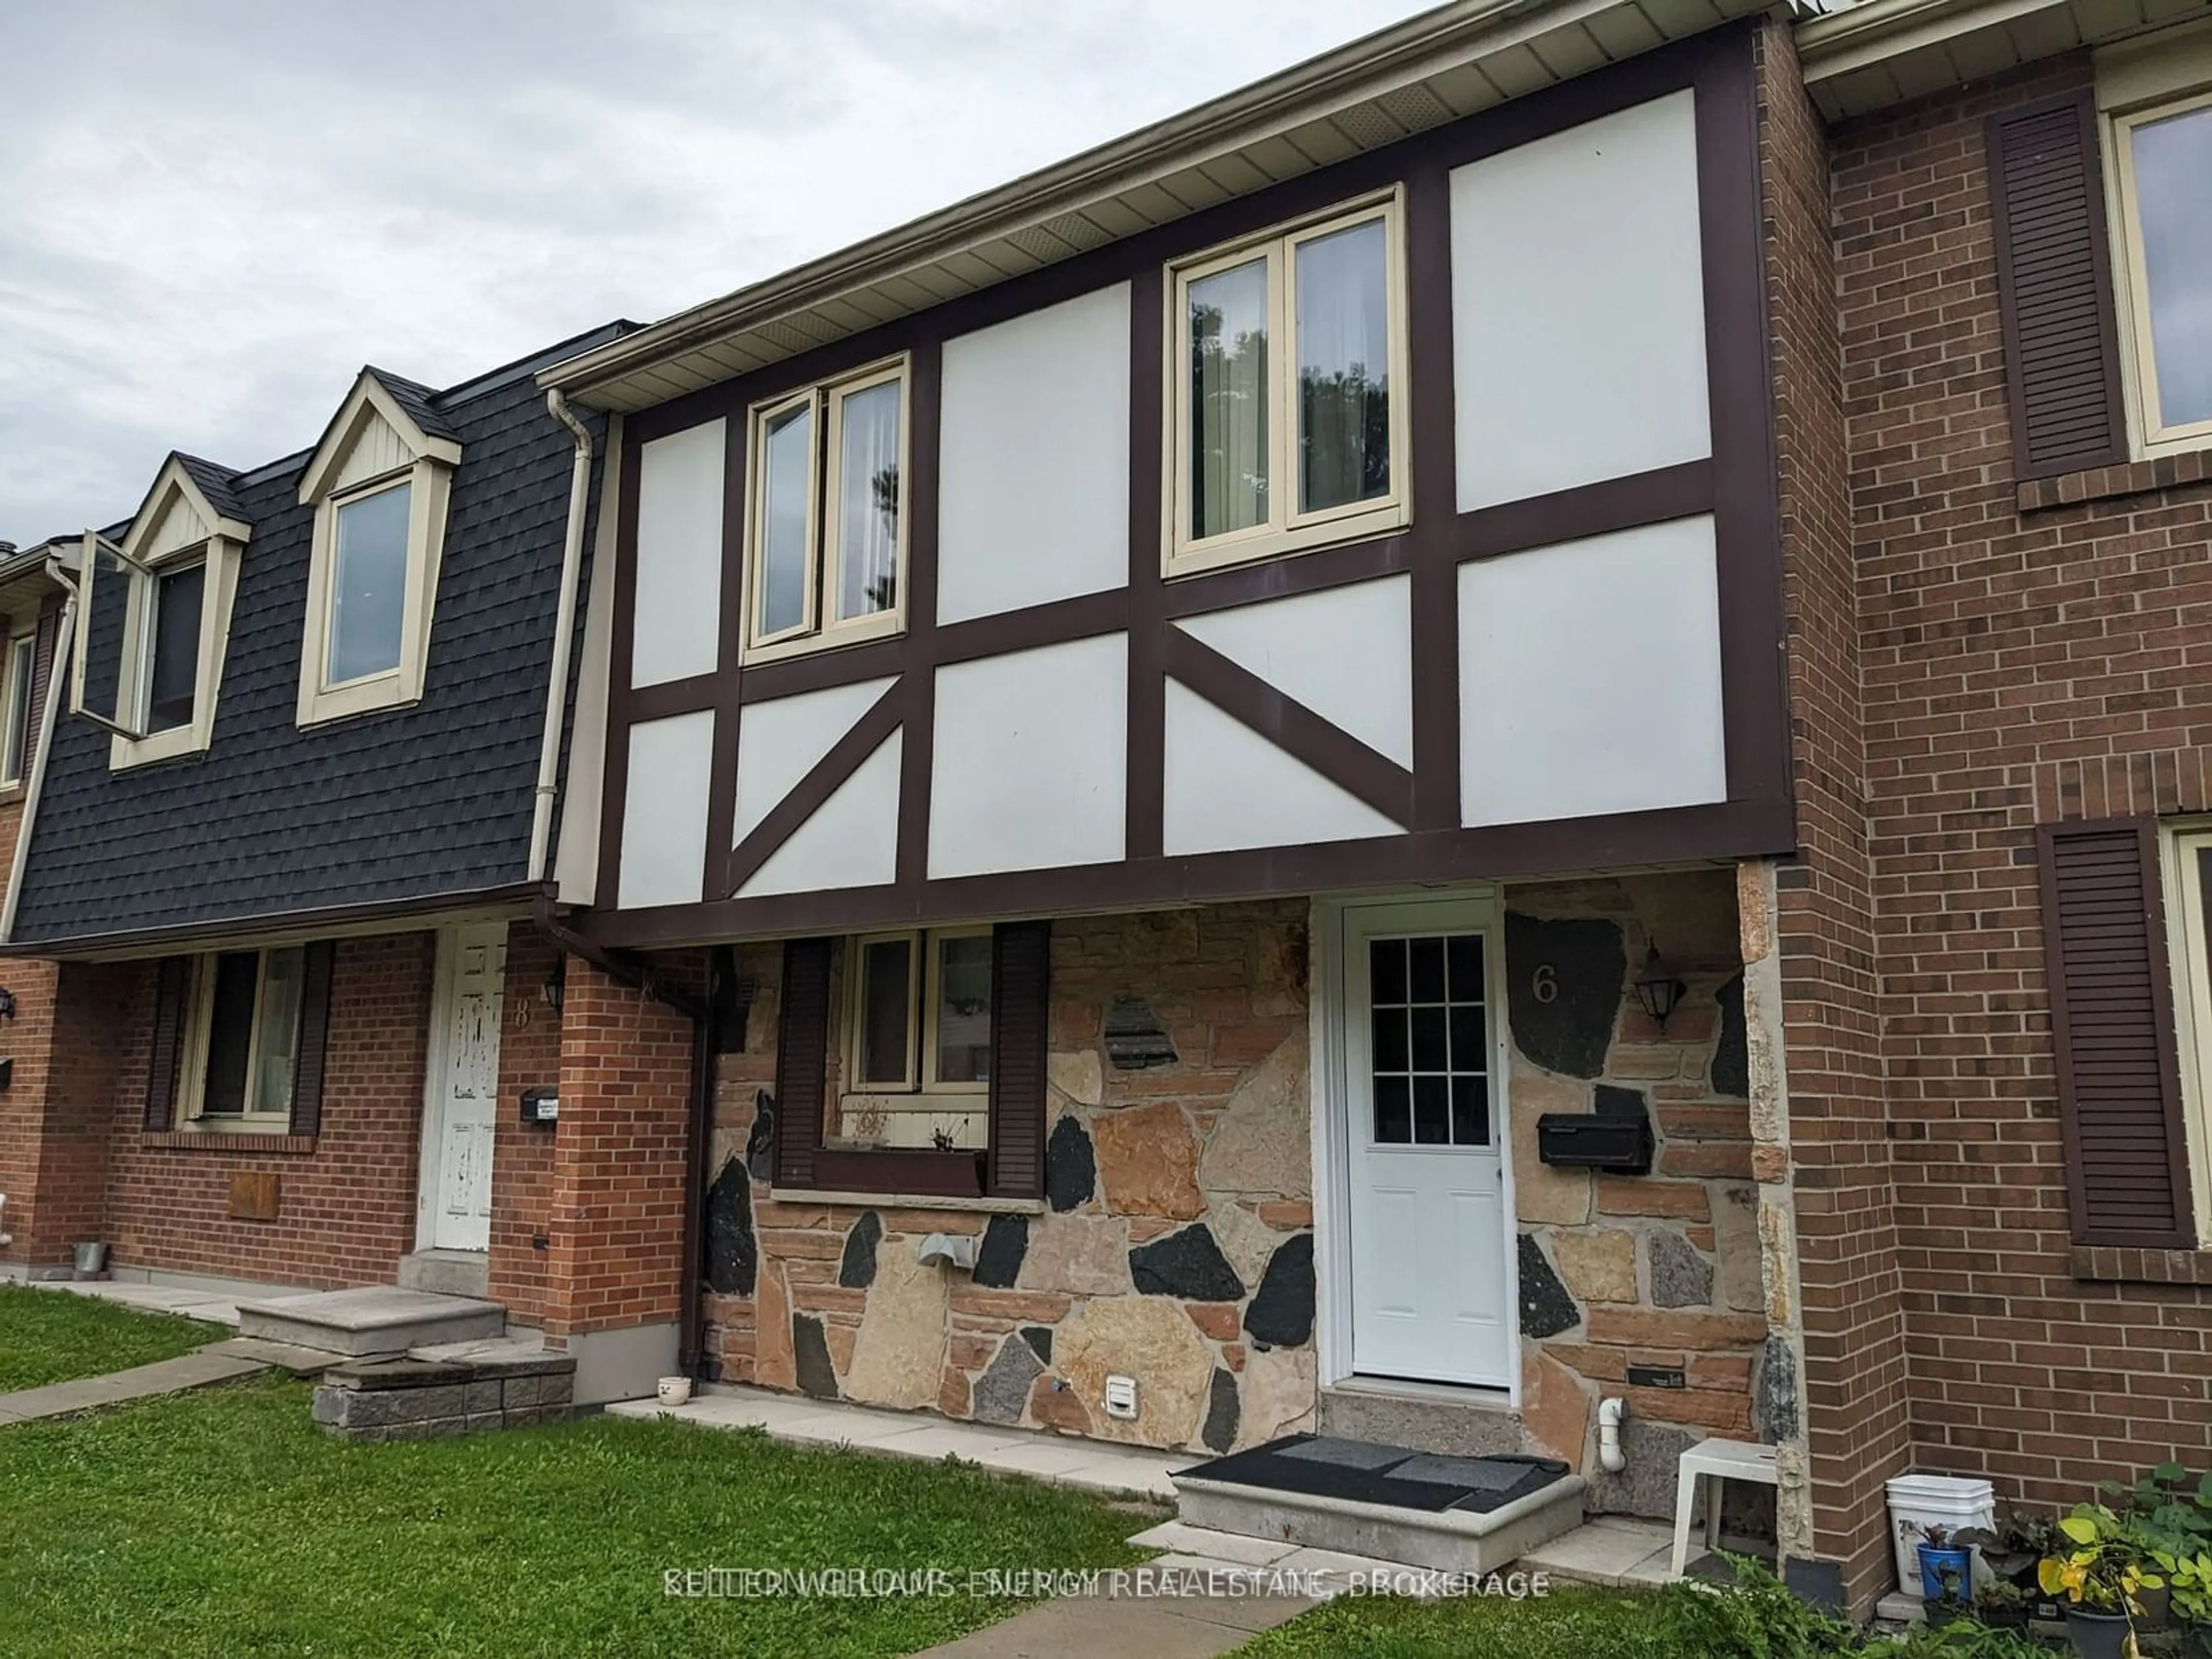 Home with brick exterior material for 270 Timberbank Blvd #6, Toronto Ontario M1W 2M1